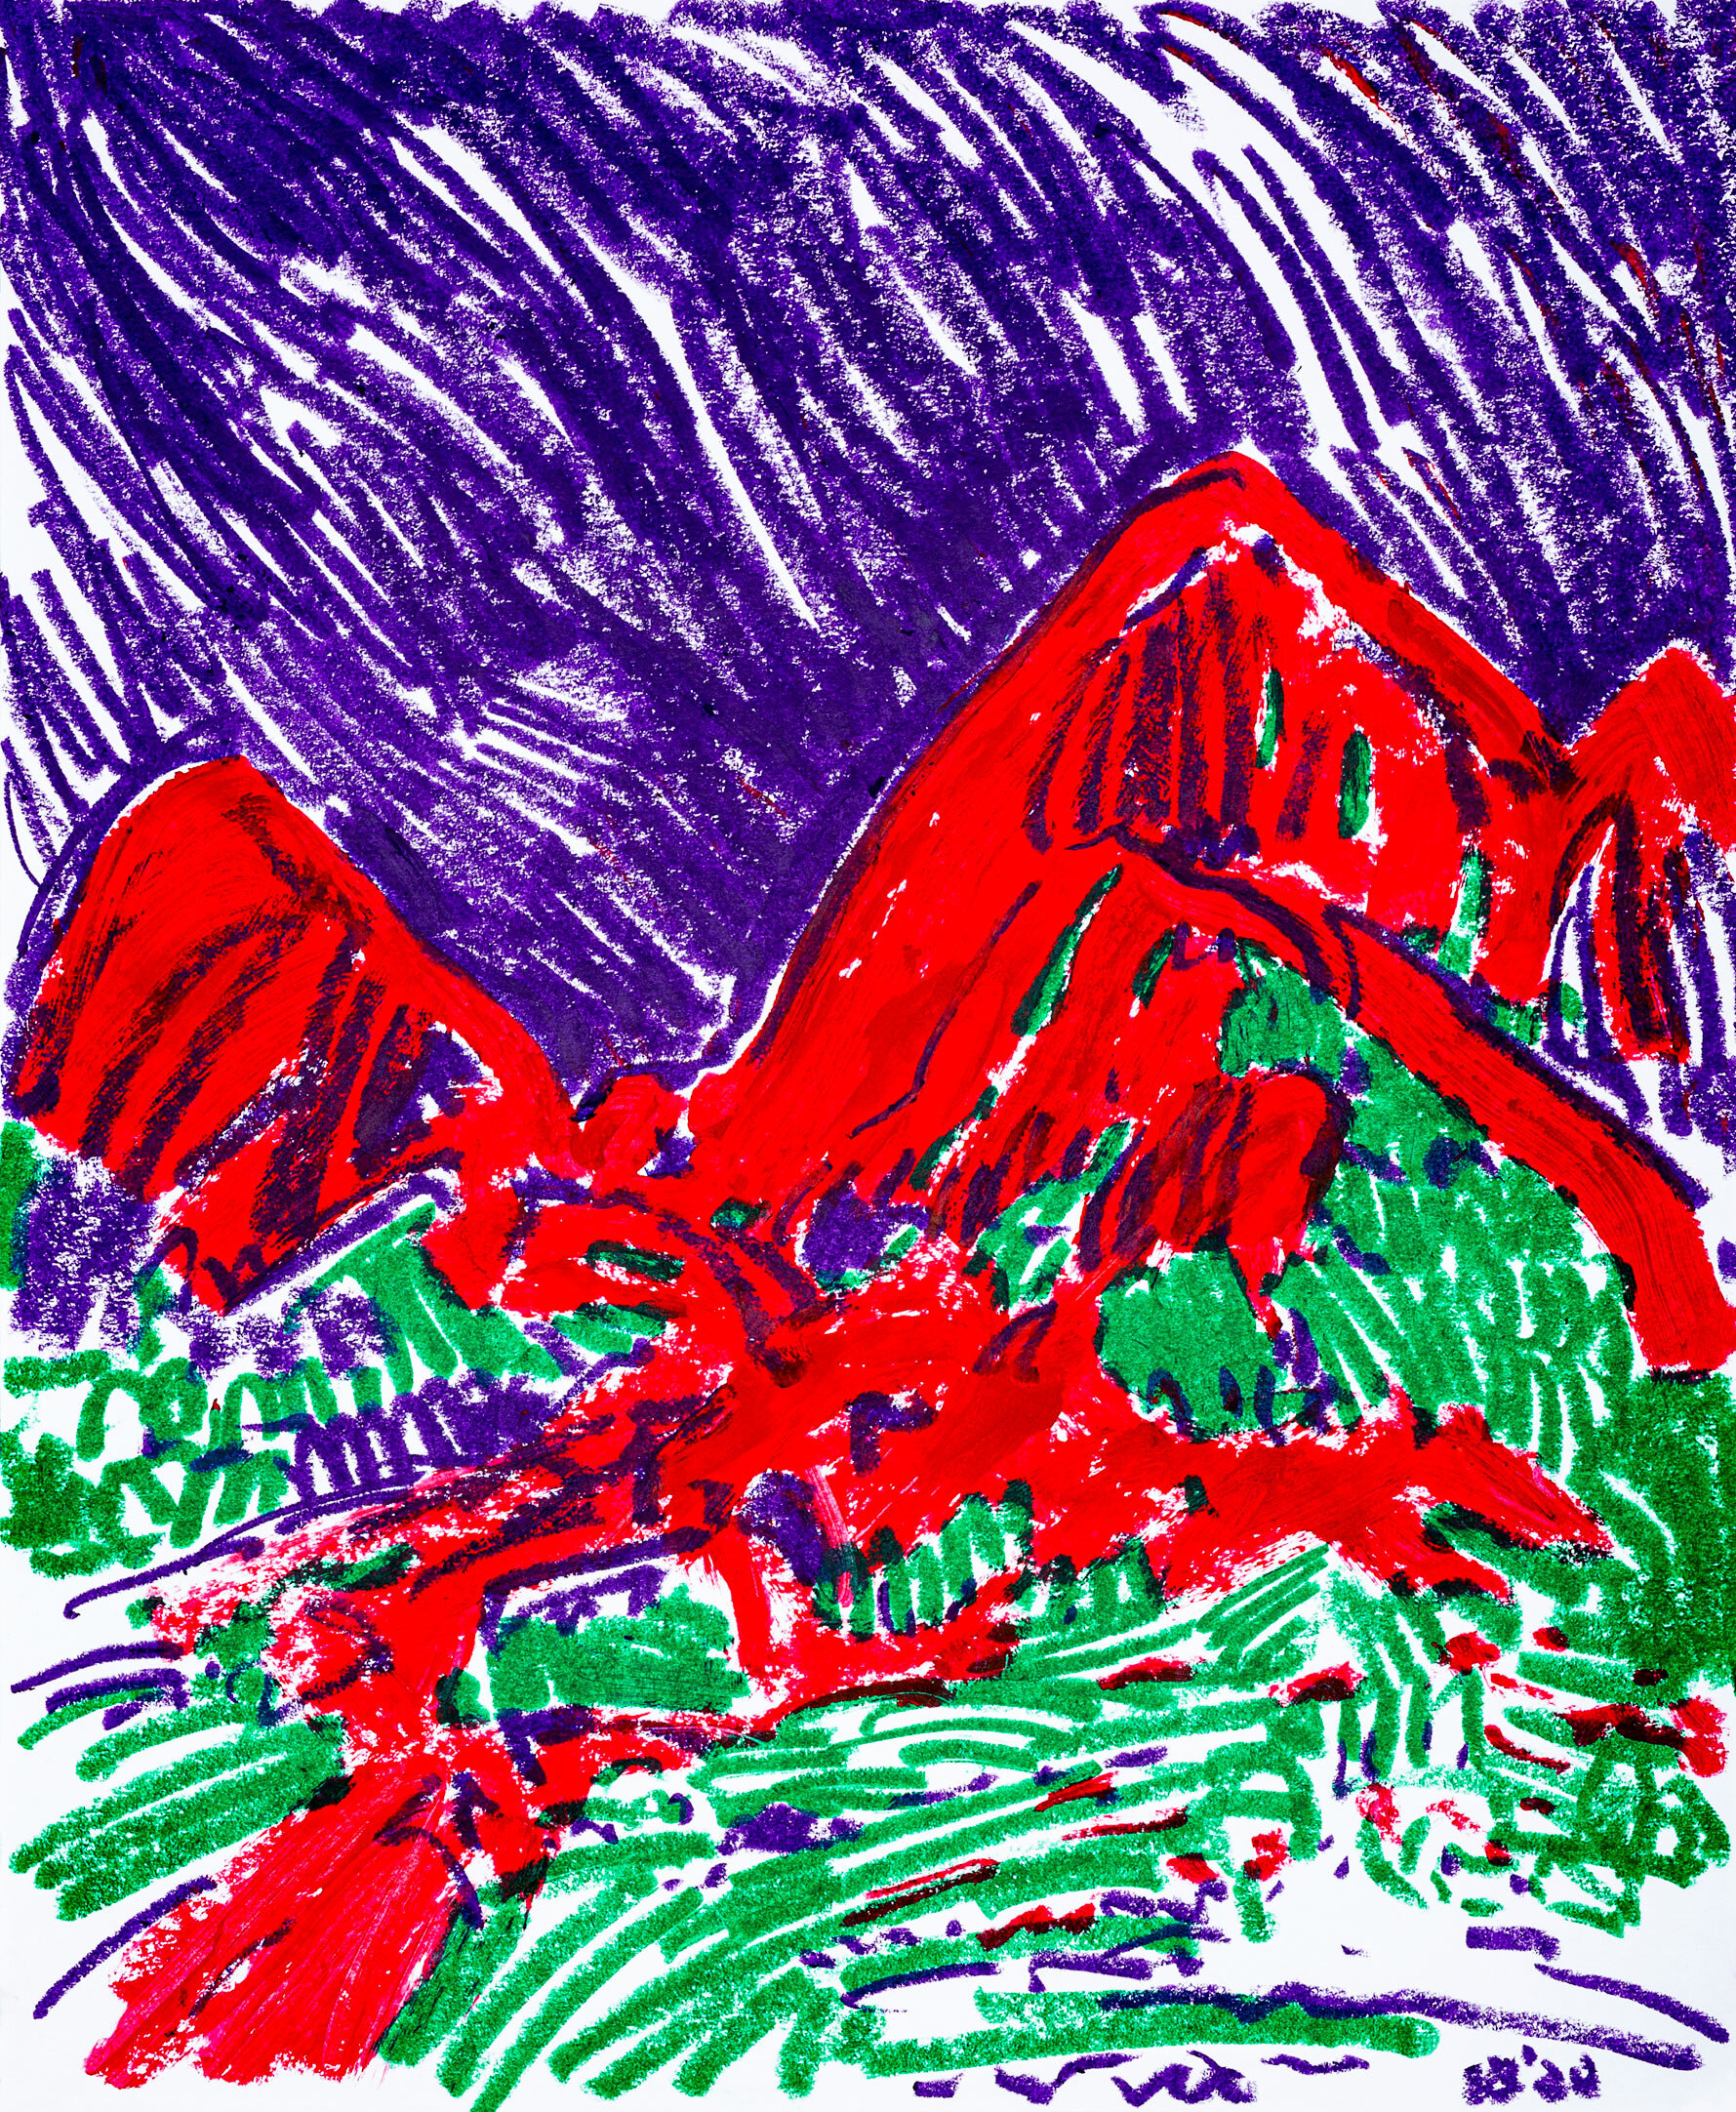 Red Mountains, 2020 - tempera sticks on paper, 14x17in